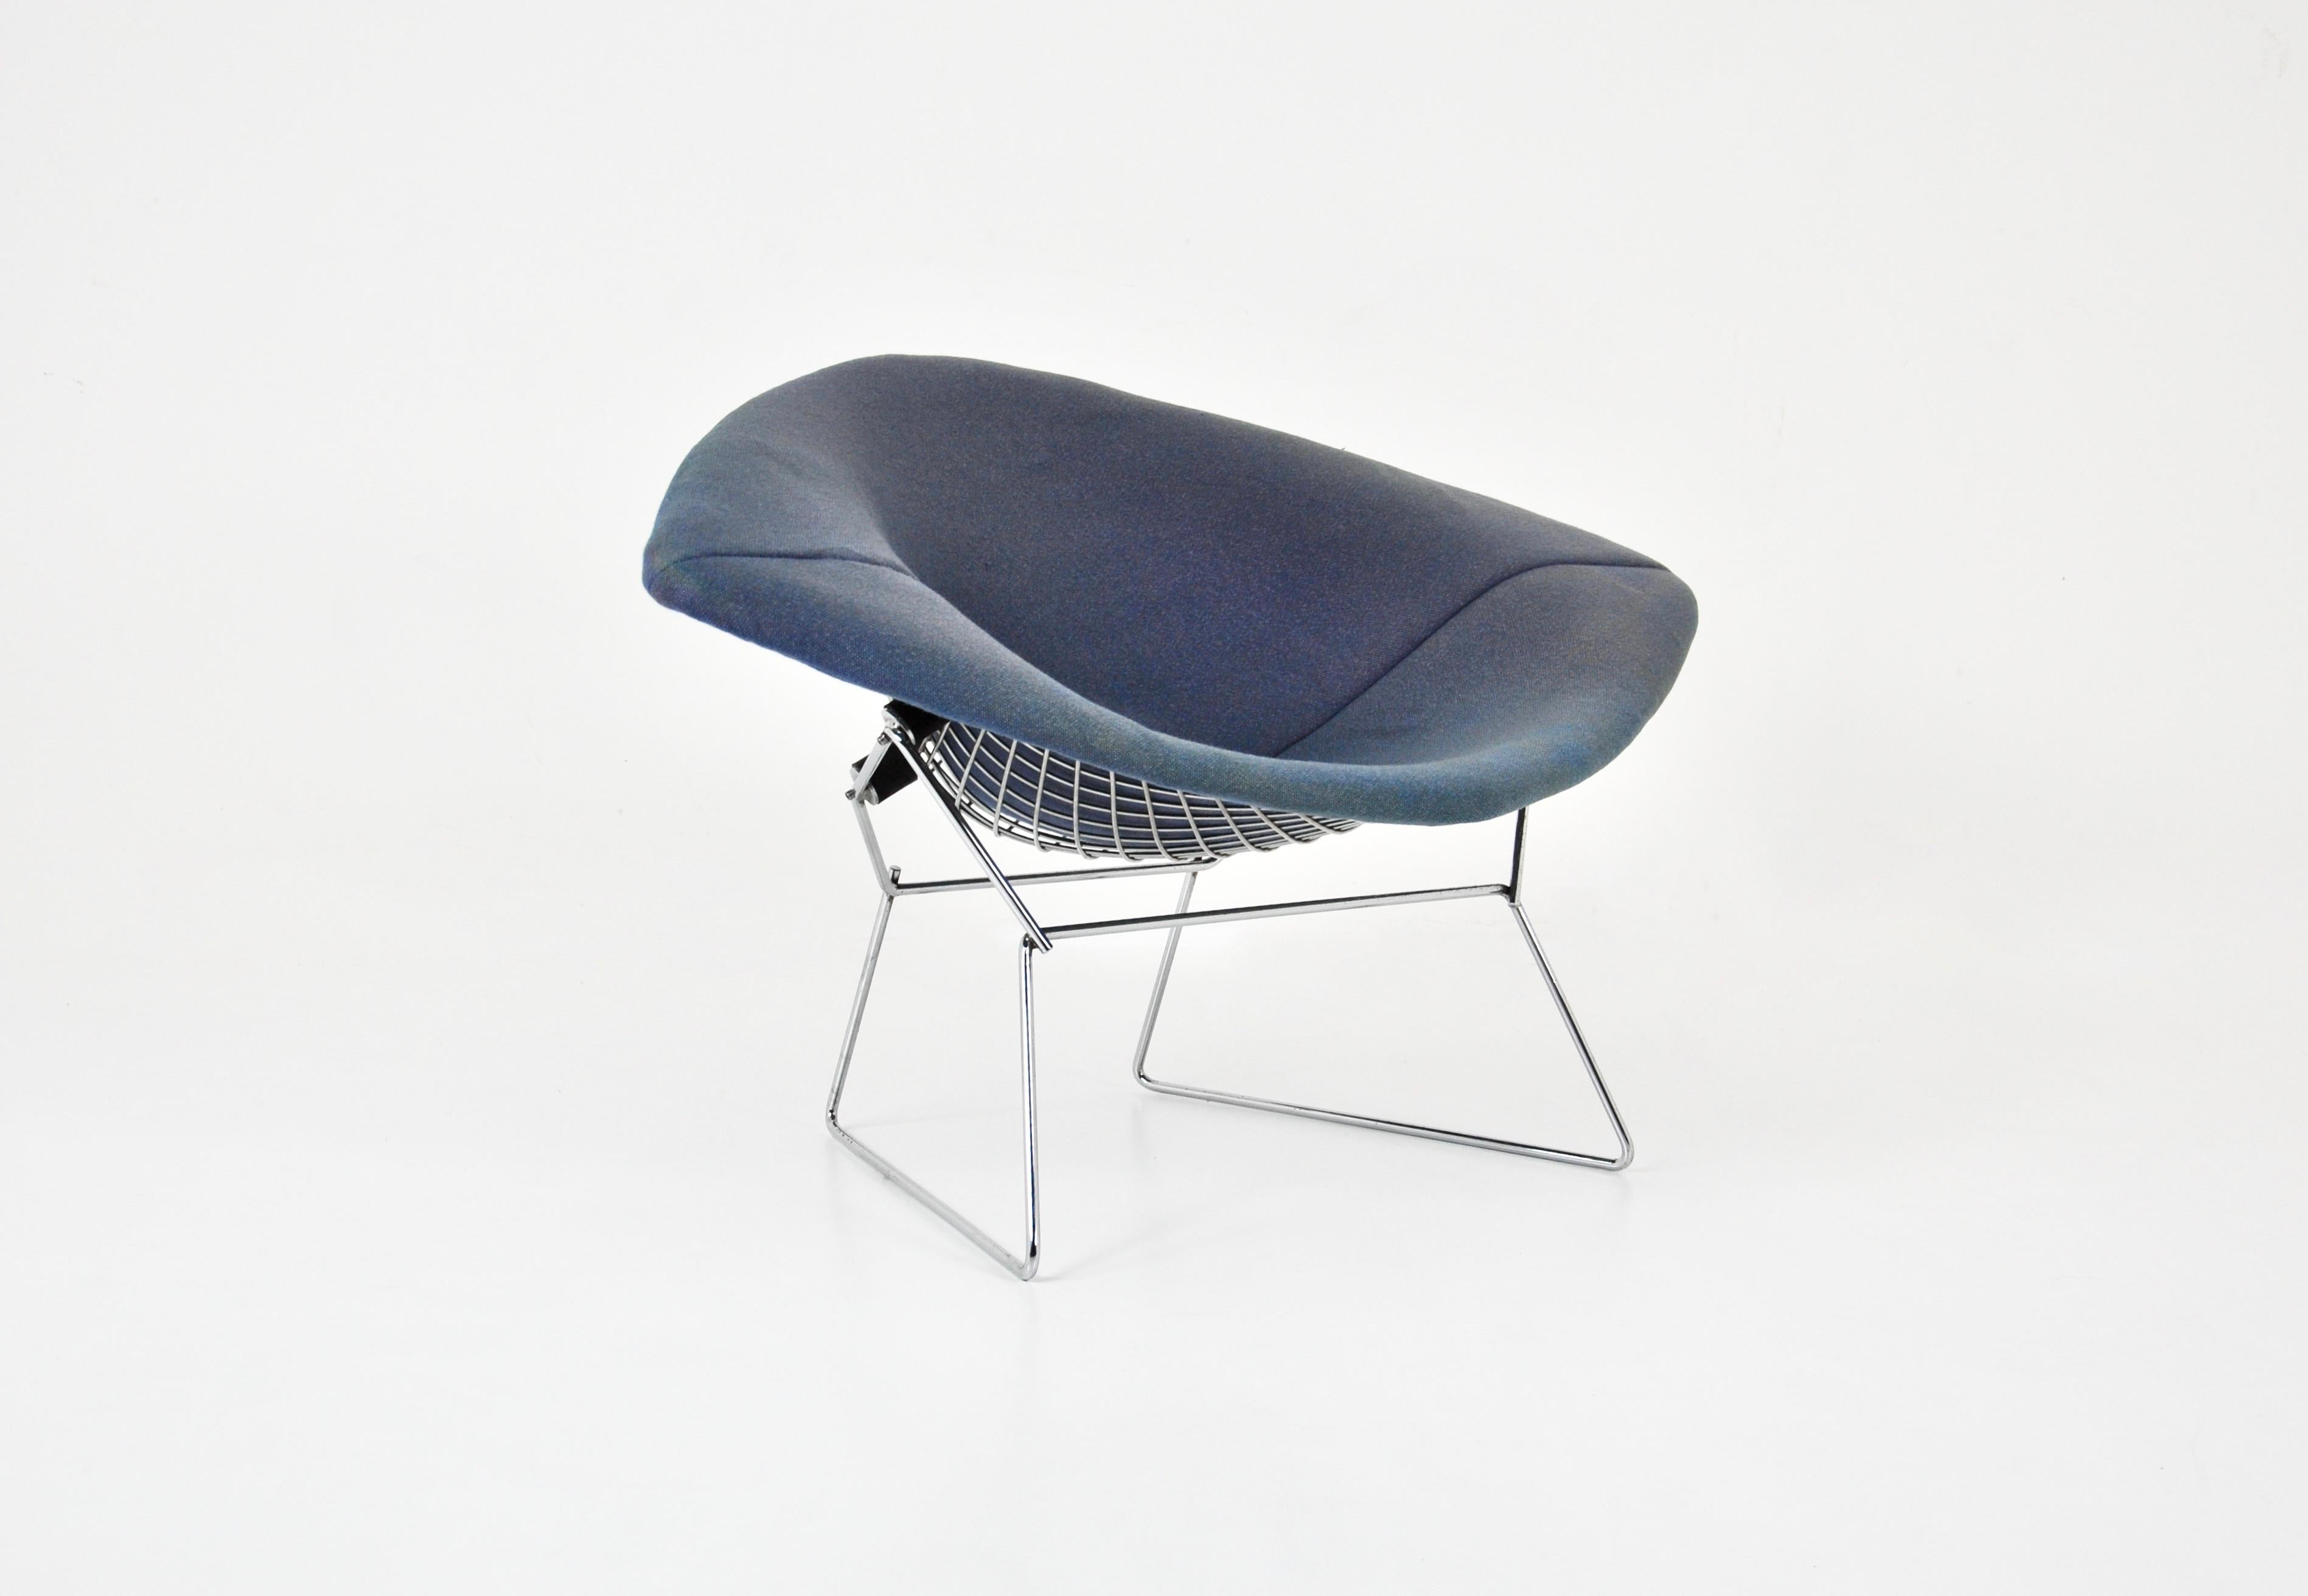 Armchair in metal and blue fabric by Harry Bertoia. Large Diamond model. Seat height: 39 cm. Wear due to time and age.